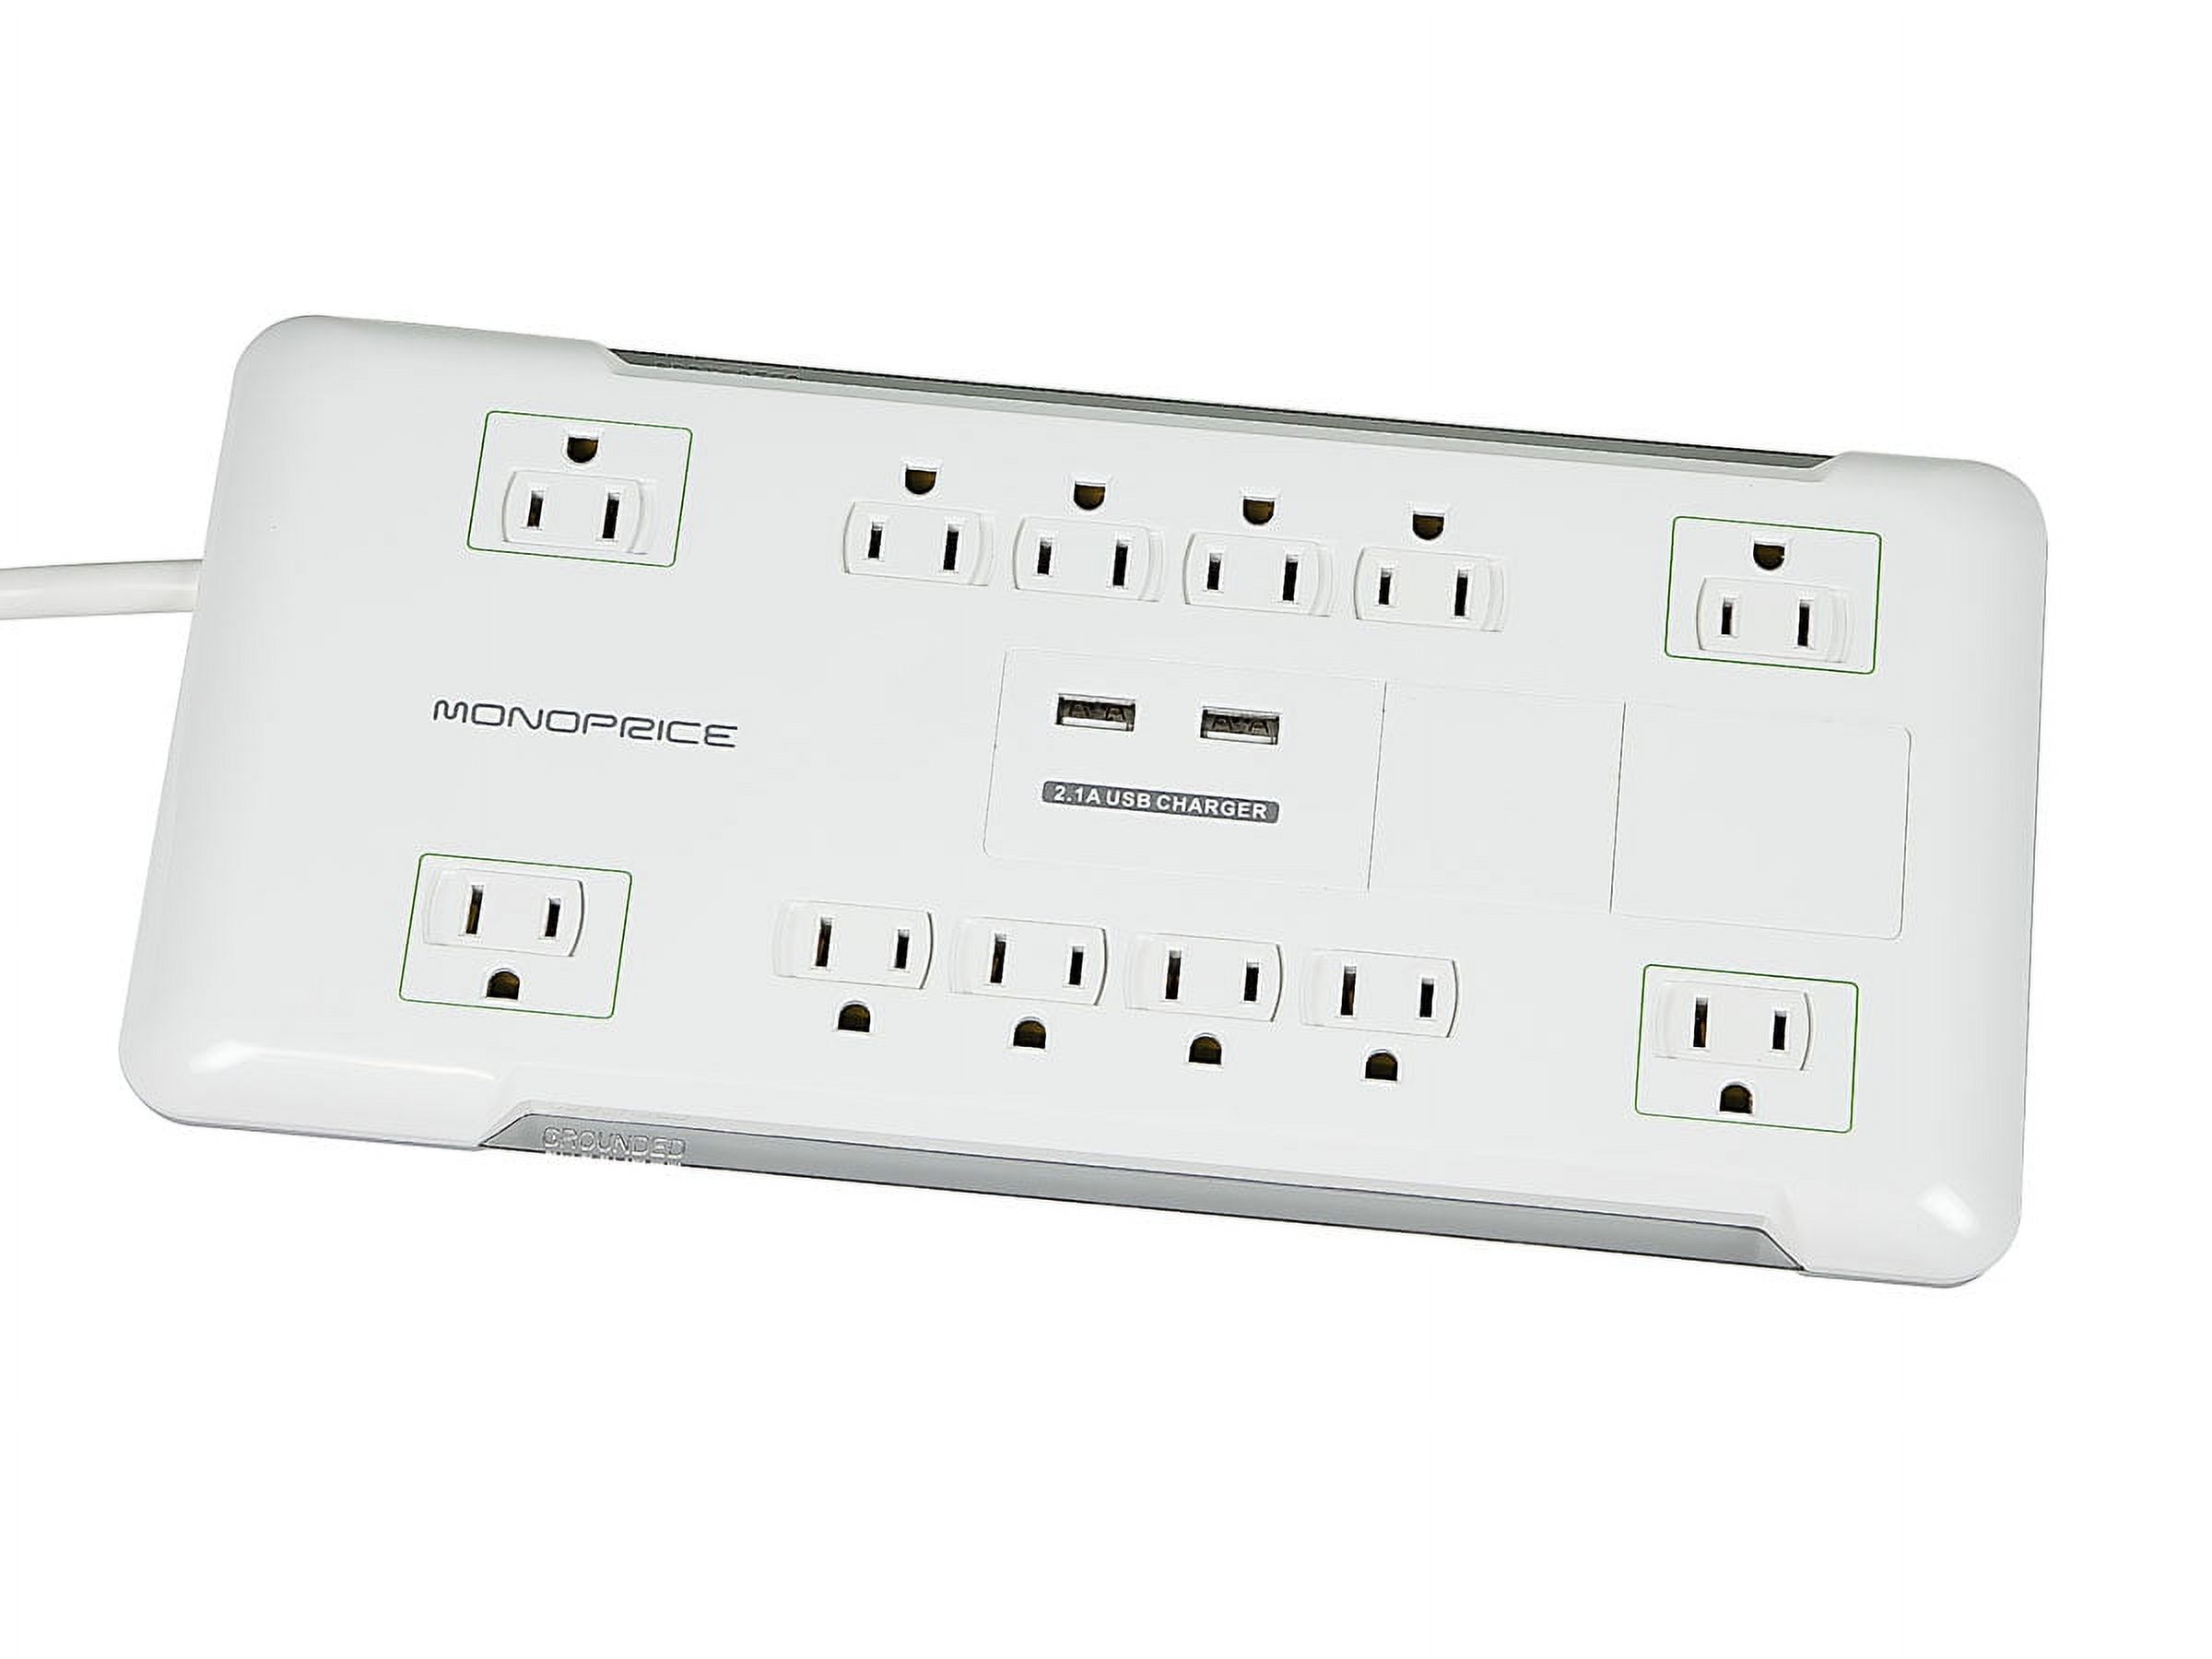 Monoprice 12 Outlet Power Surge Protector w/ 2 Built-In USB Charger Ports, 4230 Joules - image 1 of 6